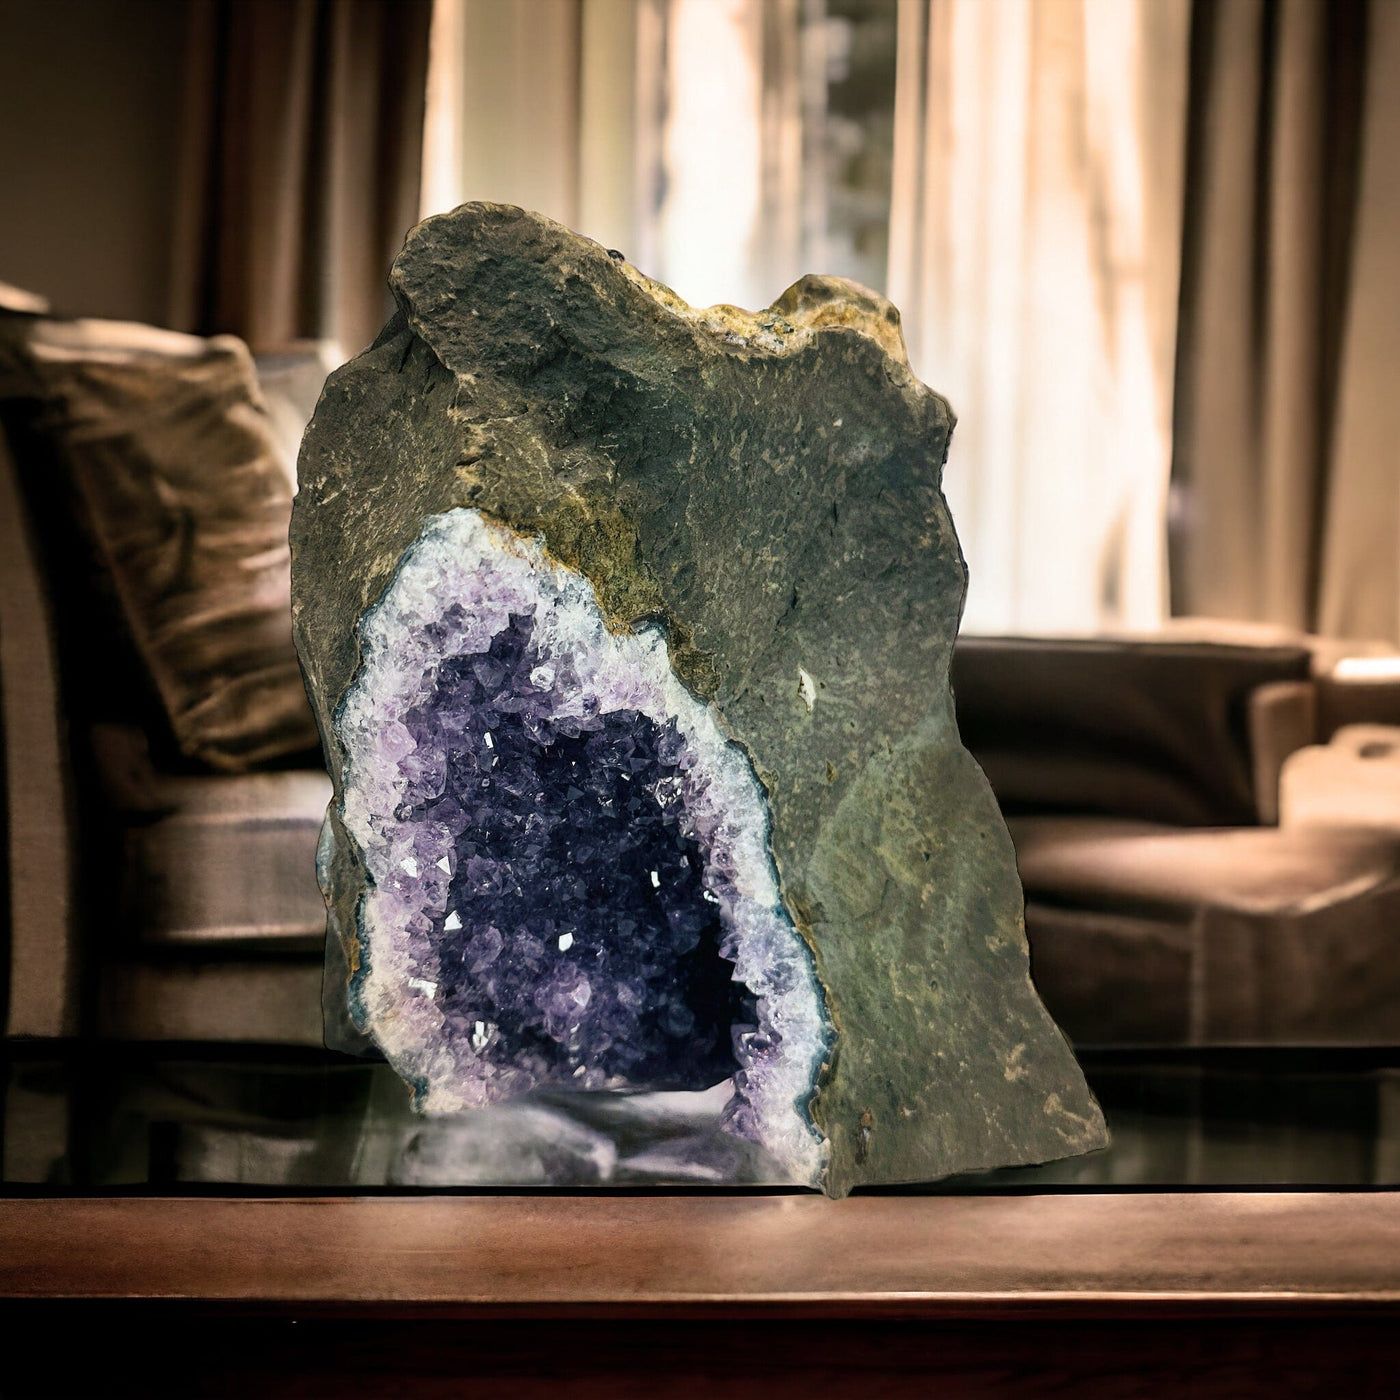  Amethyst Crystal on Matrix - You Choose - Variant E pictured on wooden table with leather sofas in background